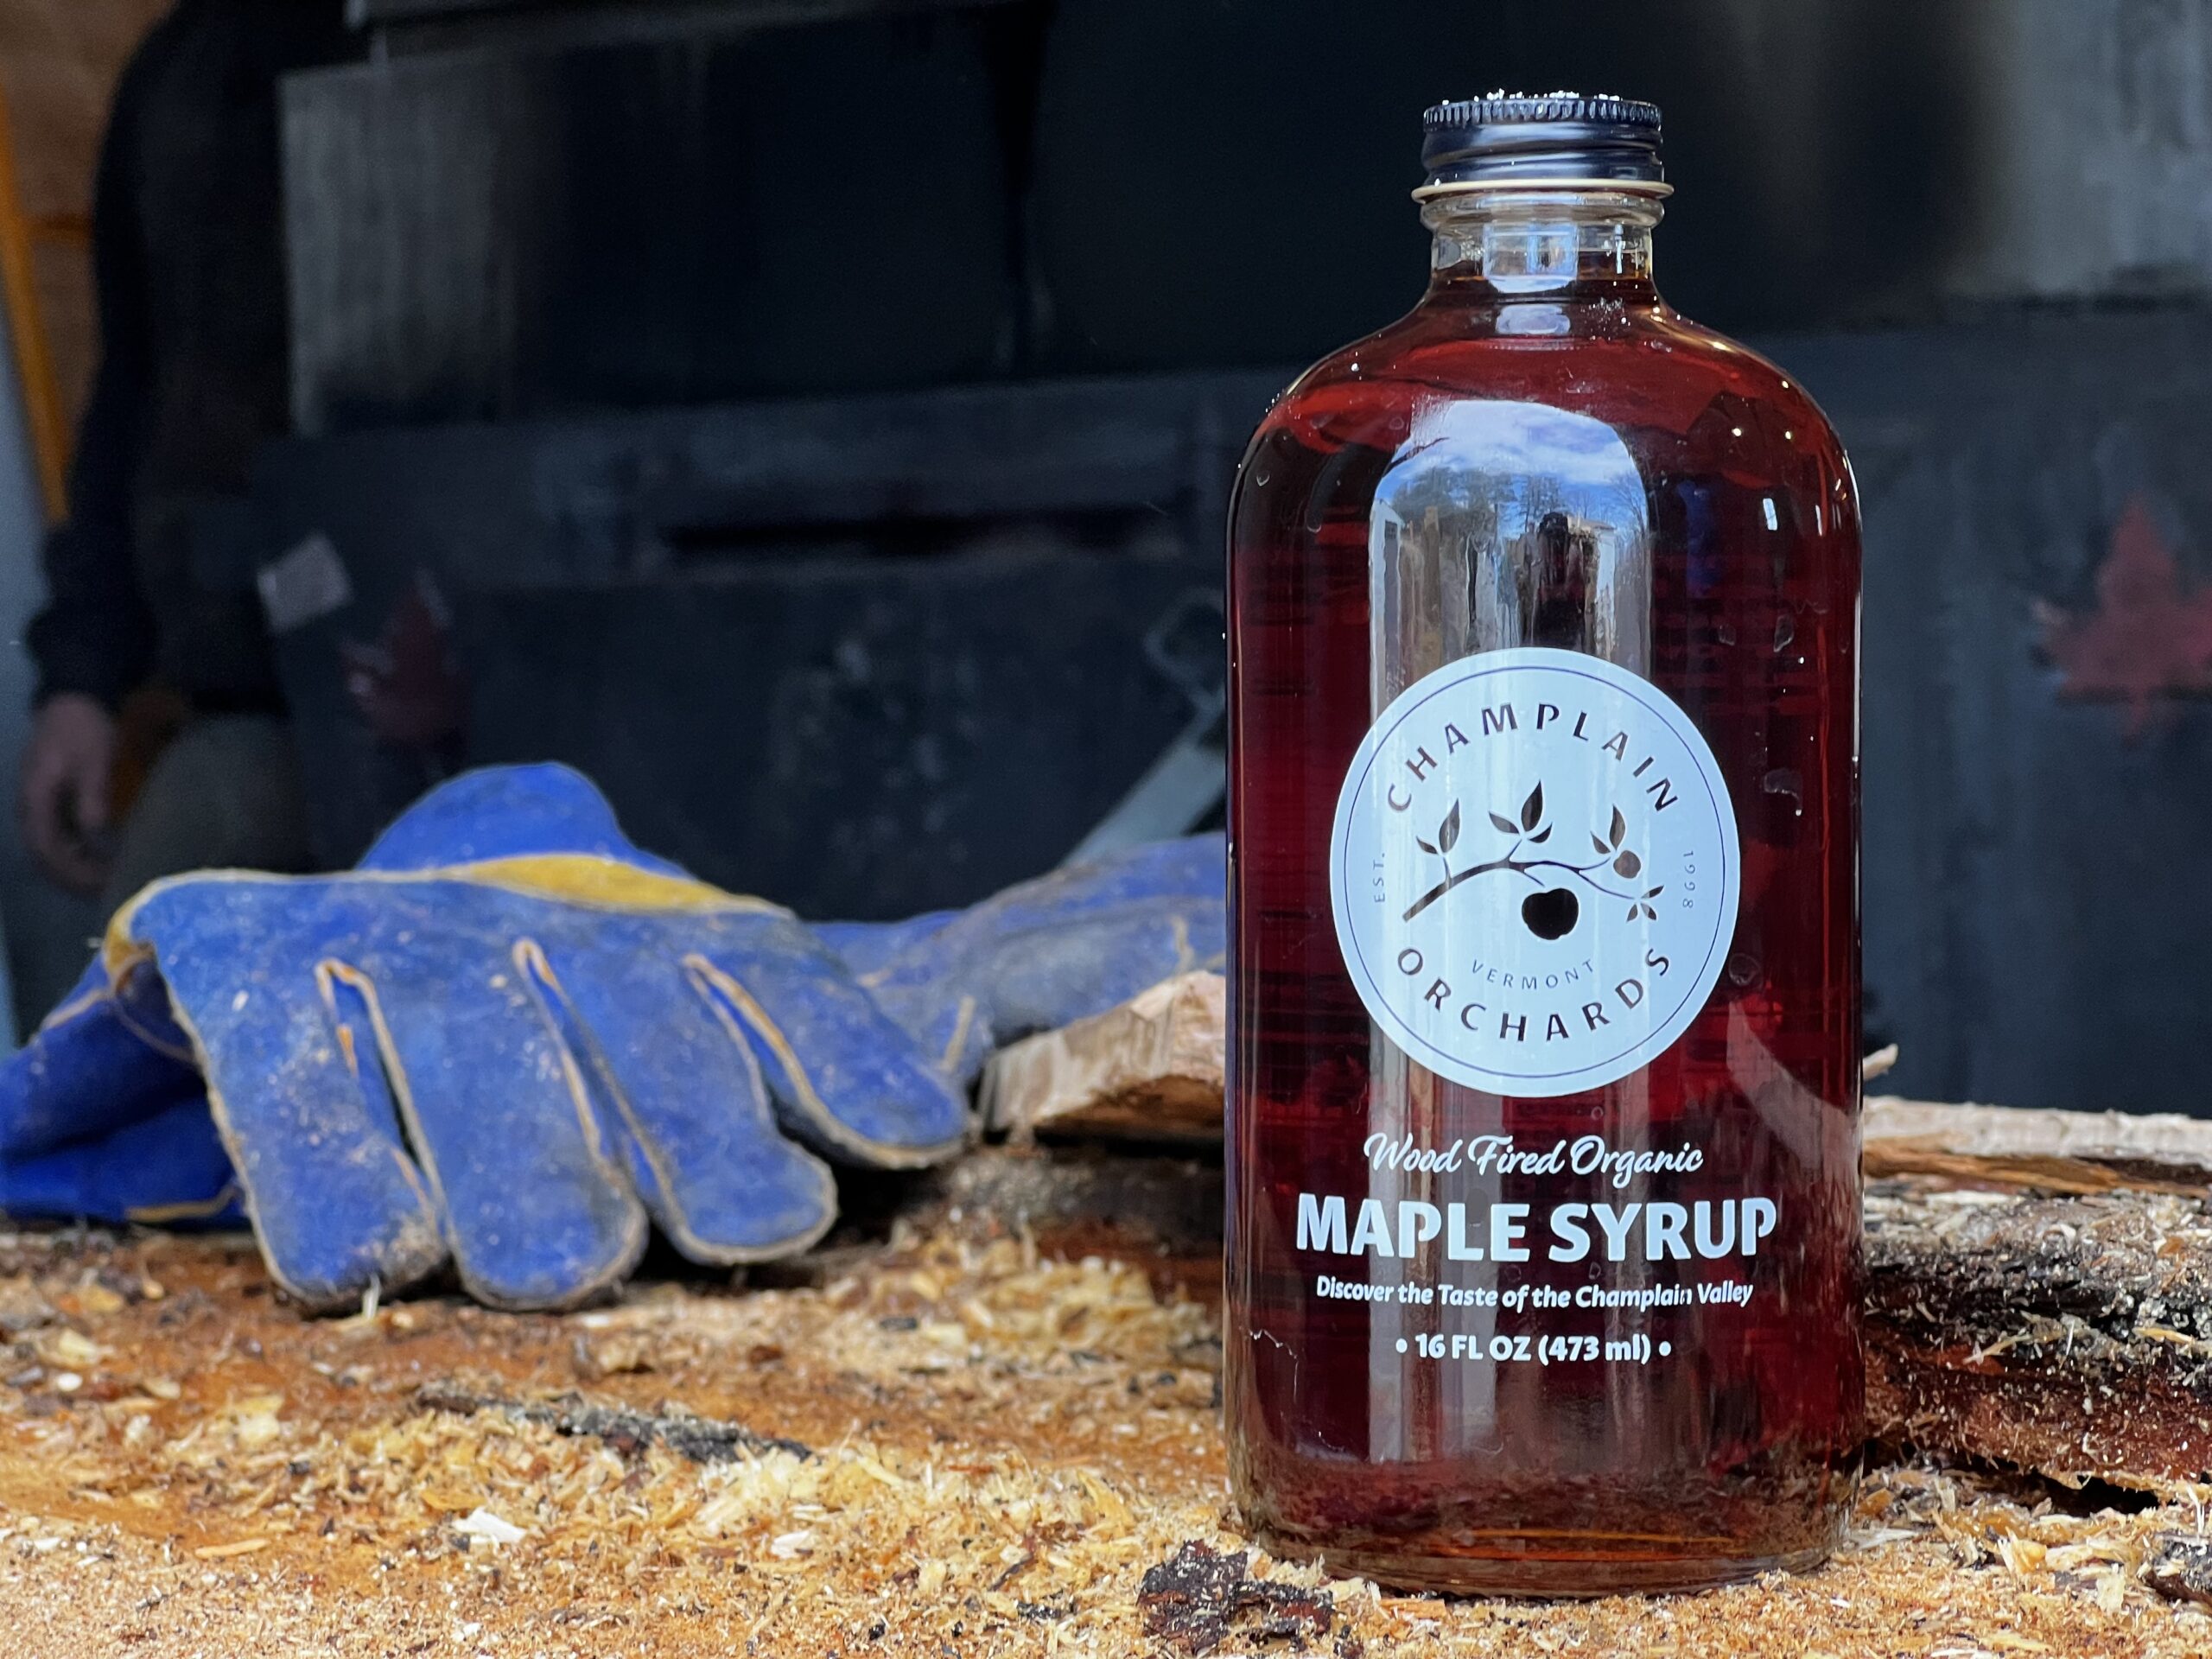 A bottle of Champlain Orchards Organic Maple Syrup.